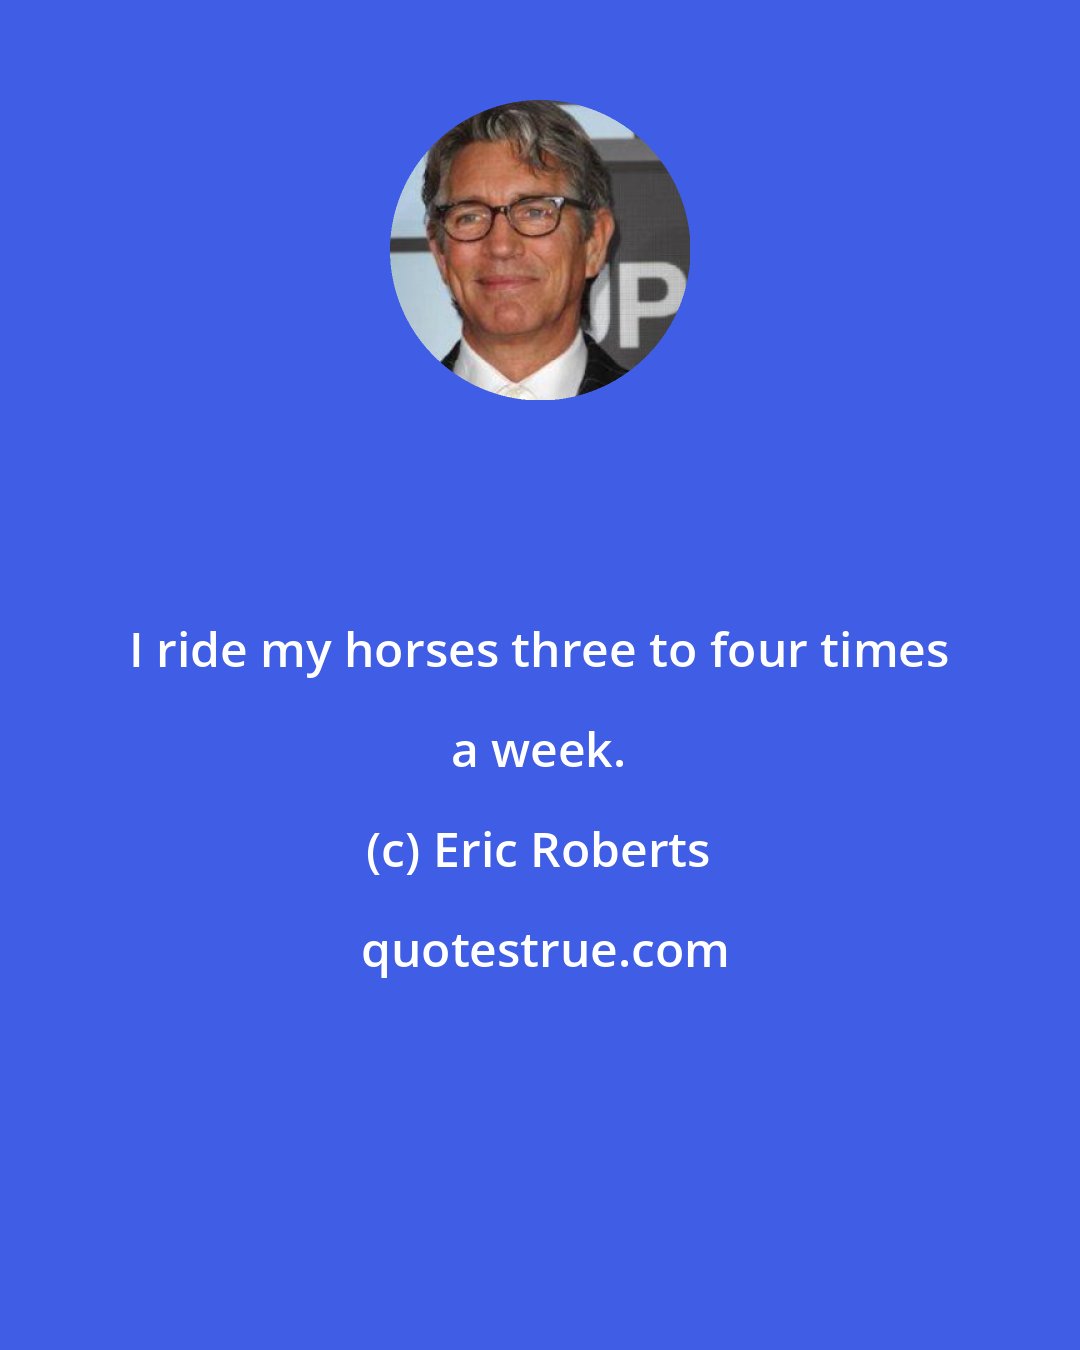 Eric Roberts: I ride my horses three to four times a week.